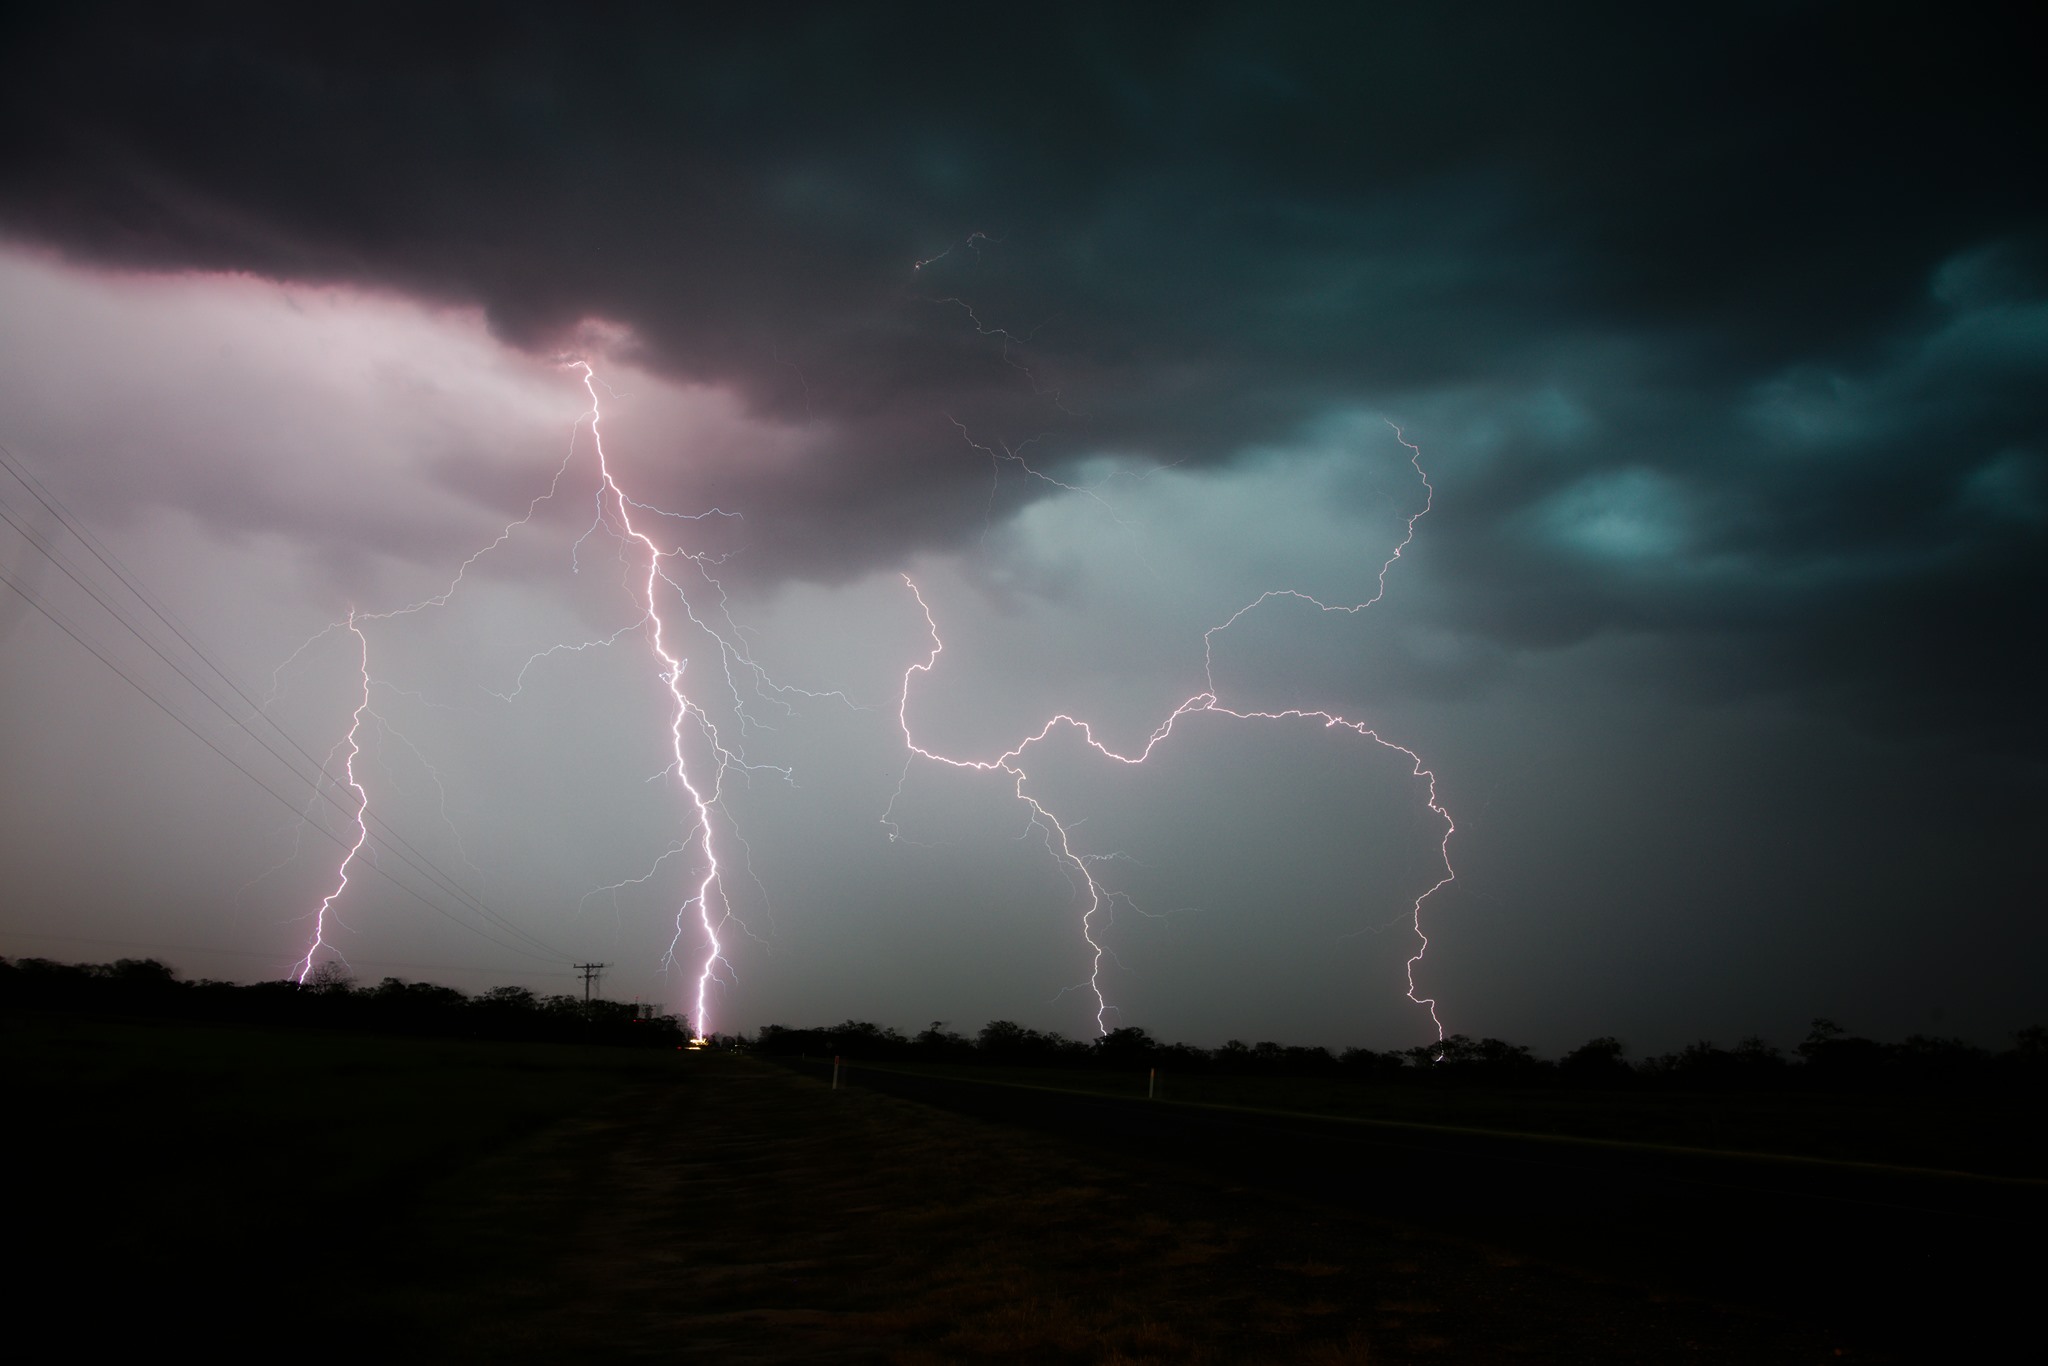 Lightning last night near Moree 21st January 2021 - quite a barrage. With Colin thanks for the immense drive - gave me a rest! Had a ball whilst it la...